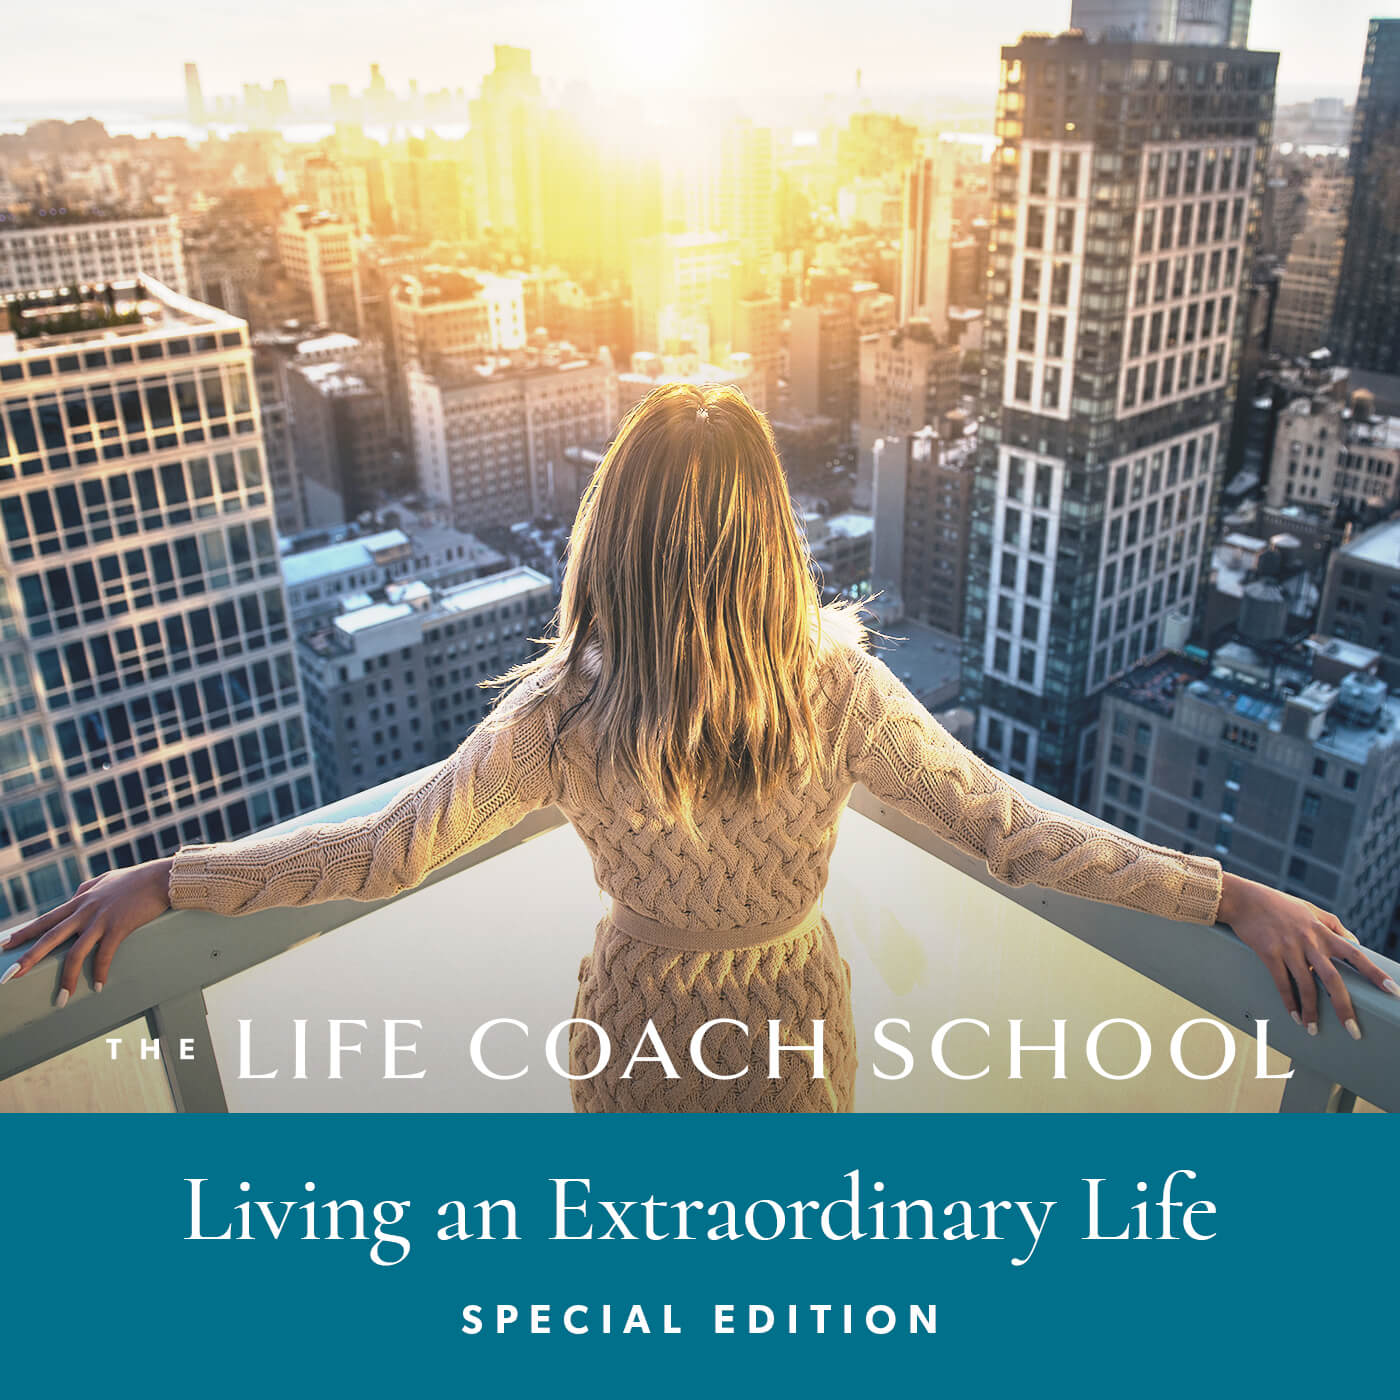 Special Edition: Living an Extraordinary Life